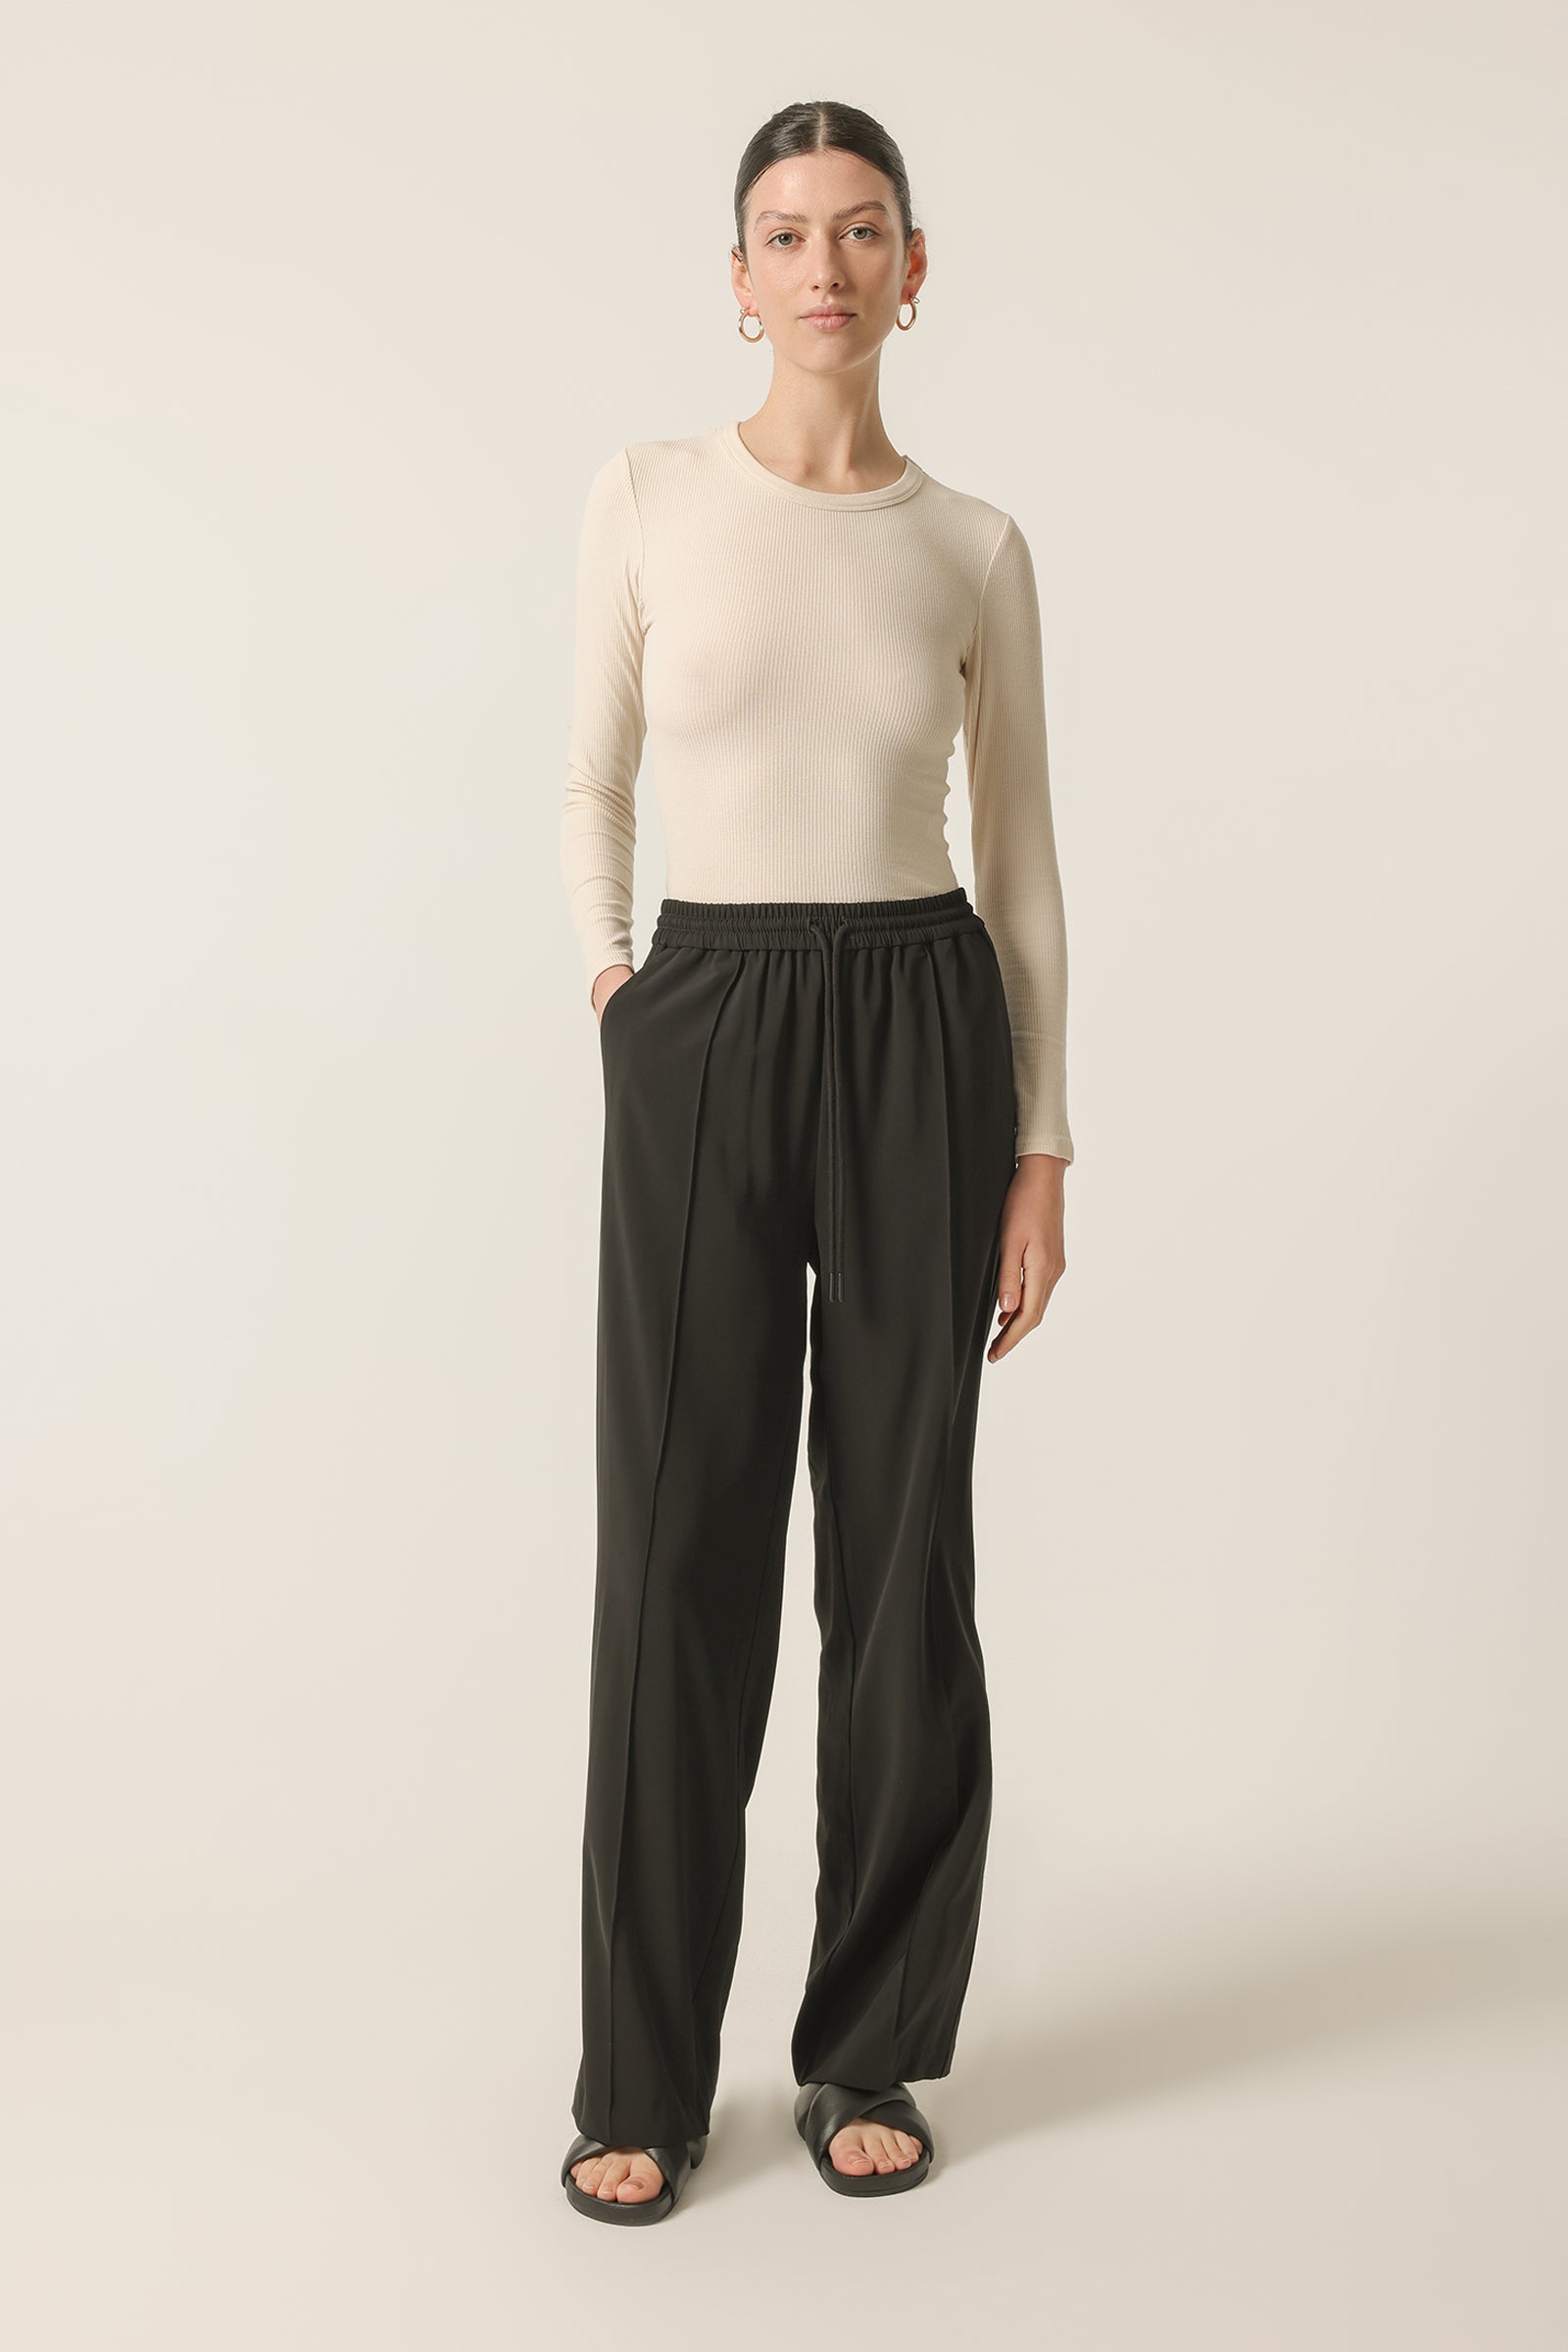 Nude Lucy Melrose Pant in Black